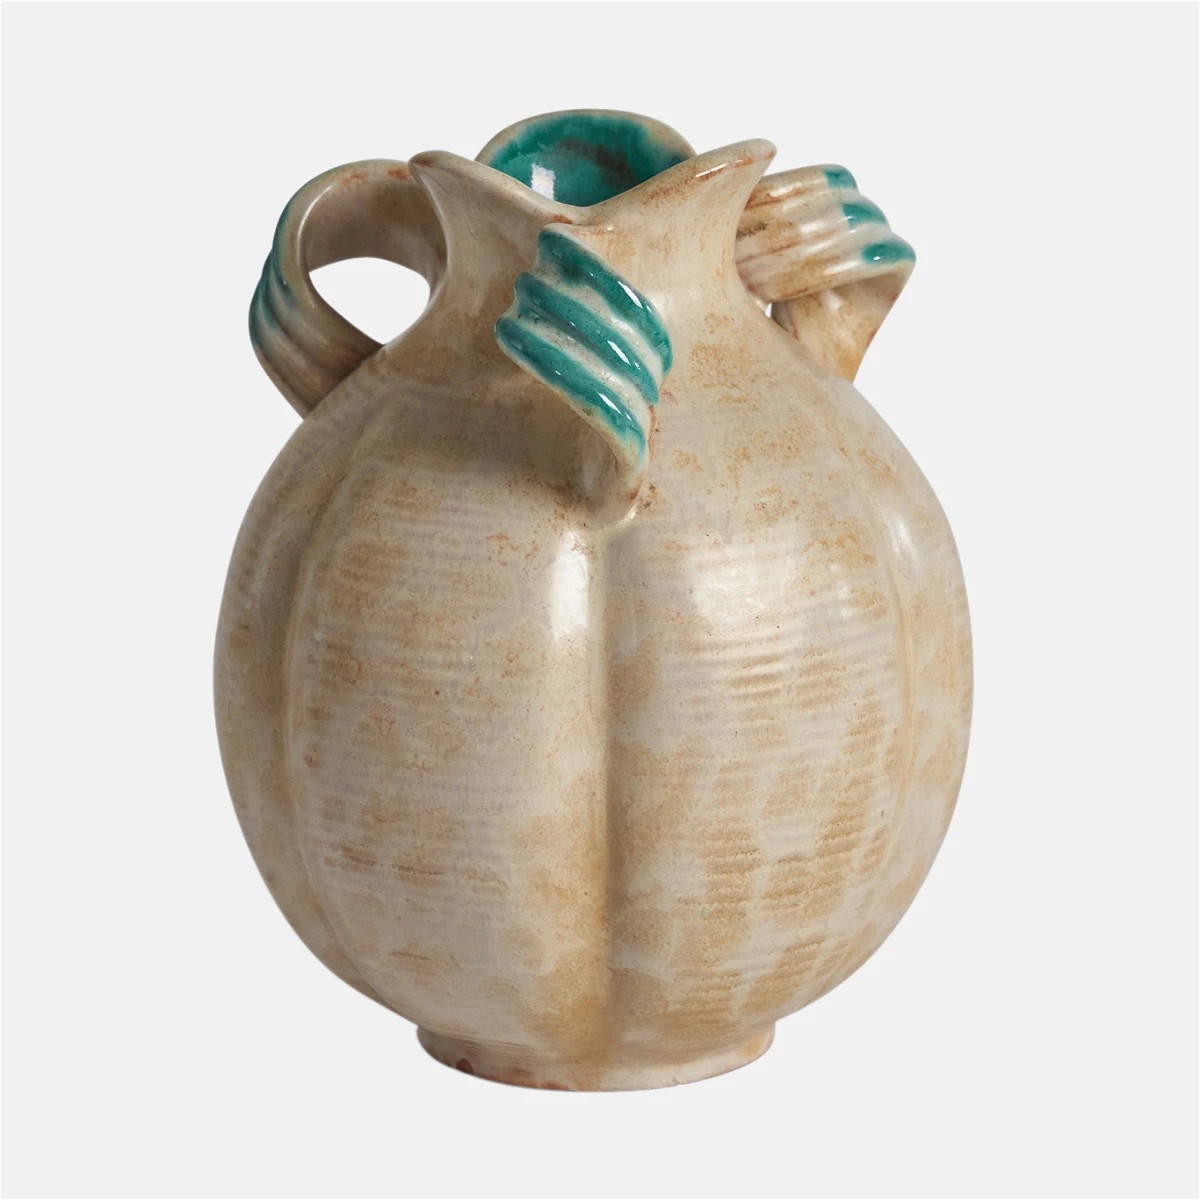 The image of an Harald Östergren Vase product